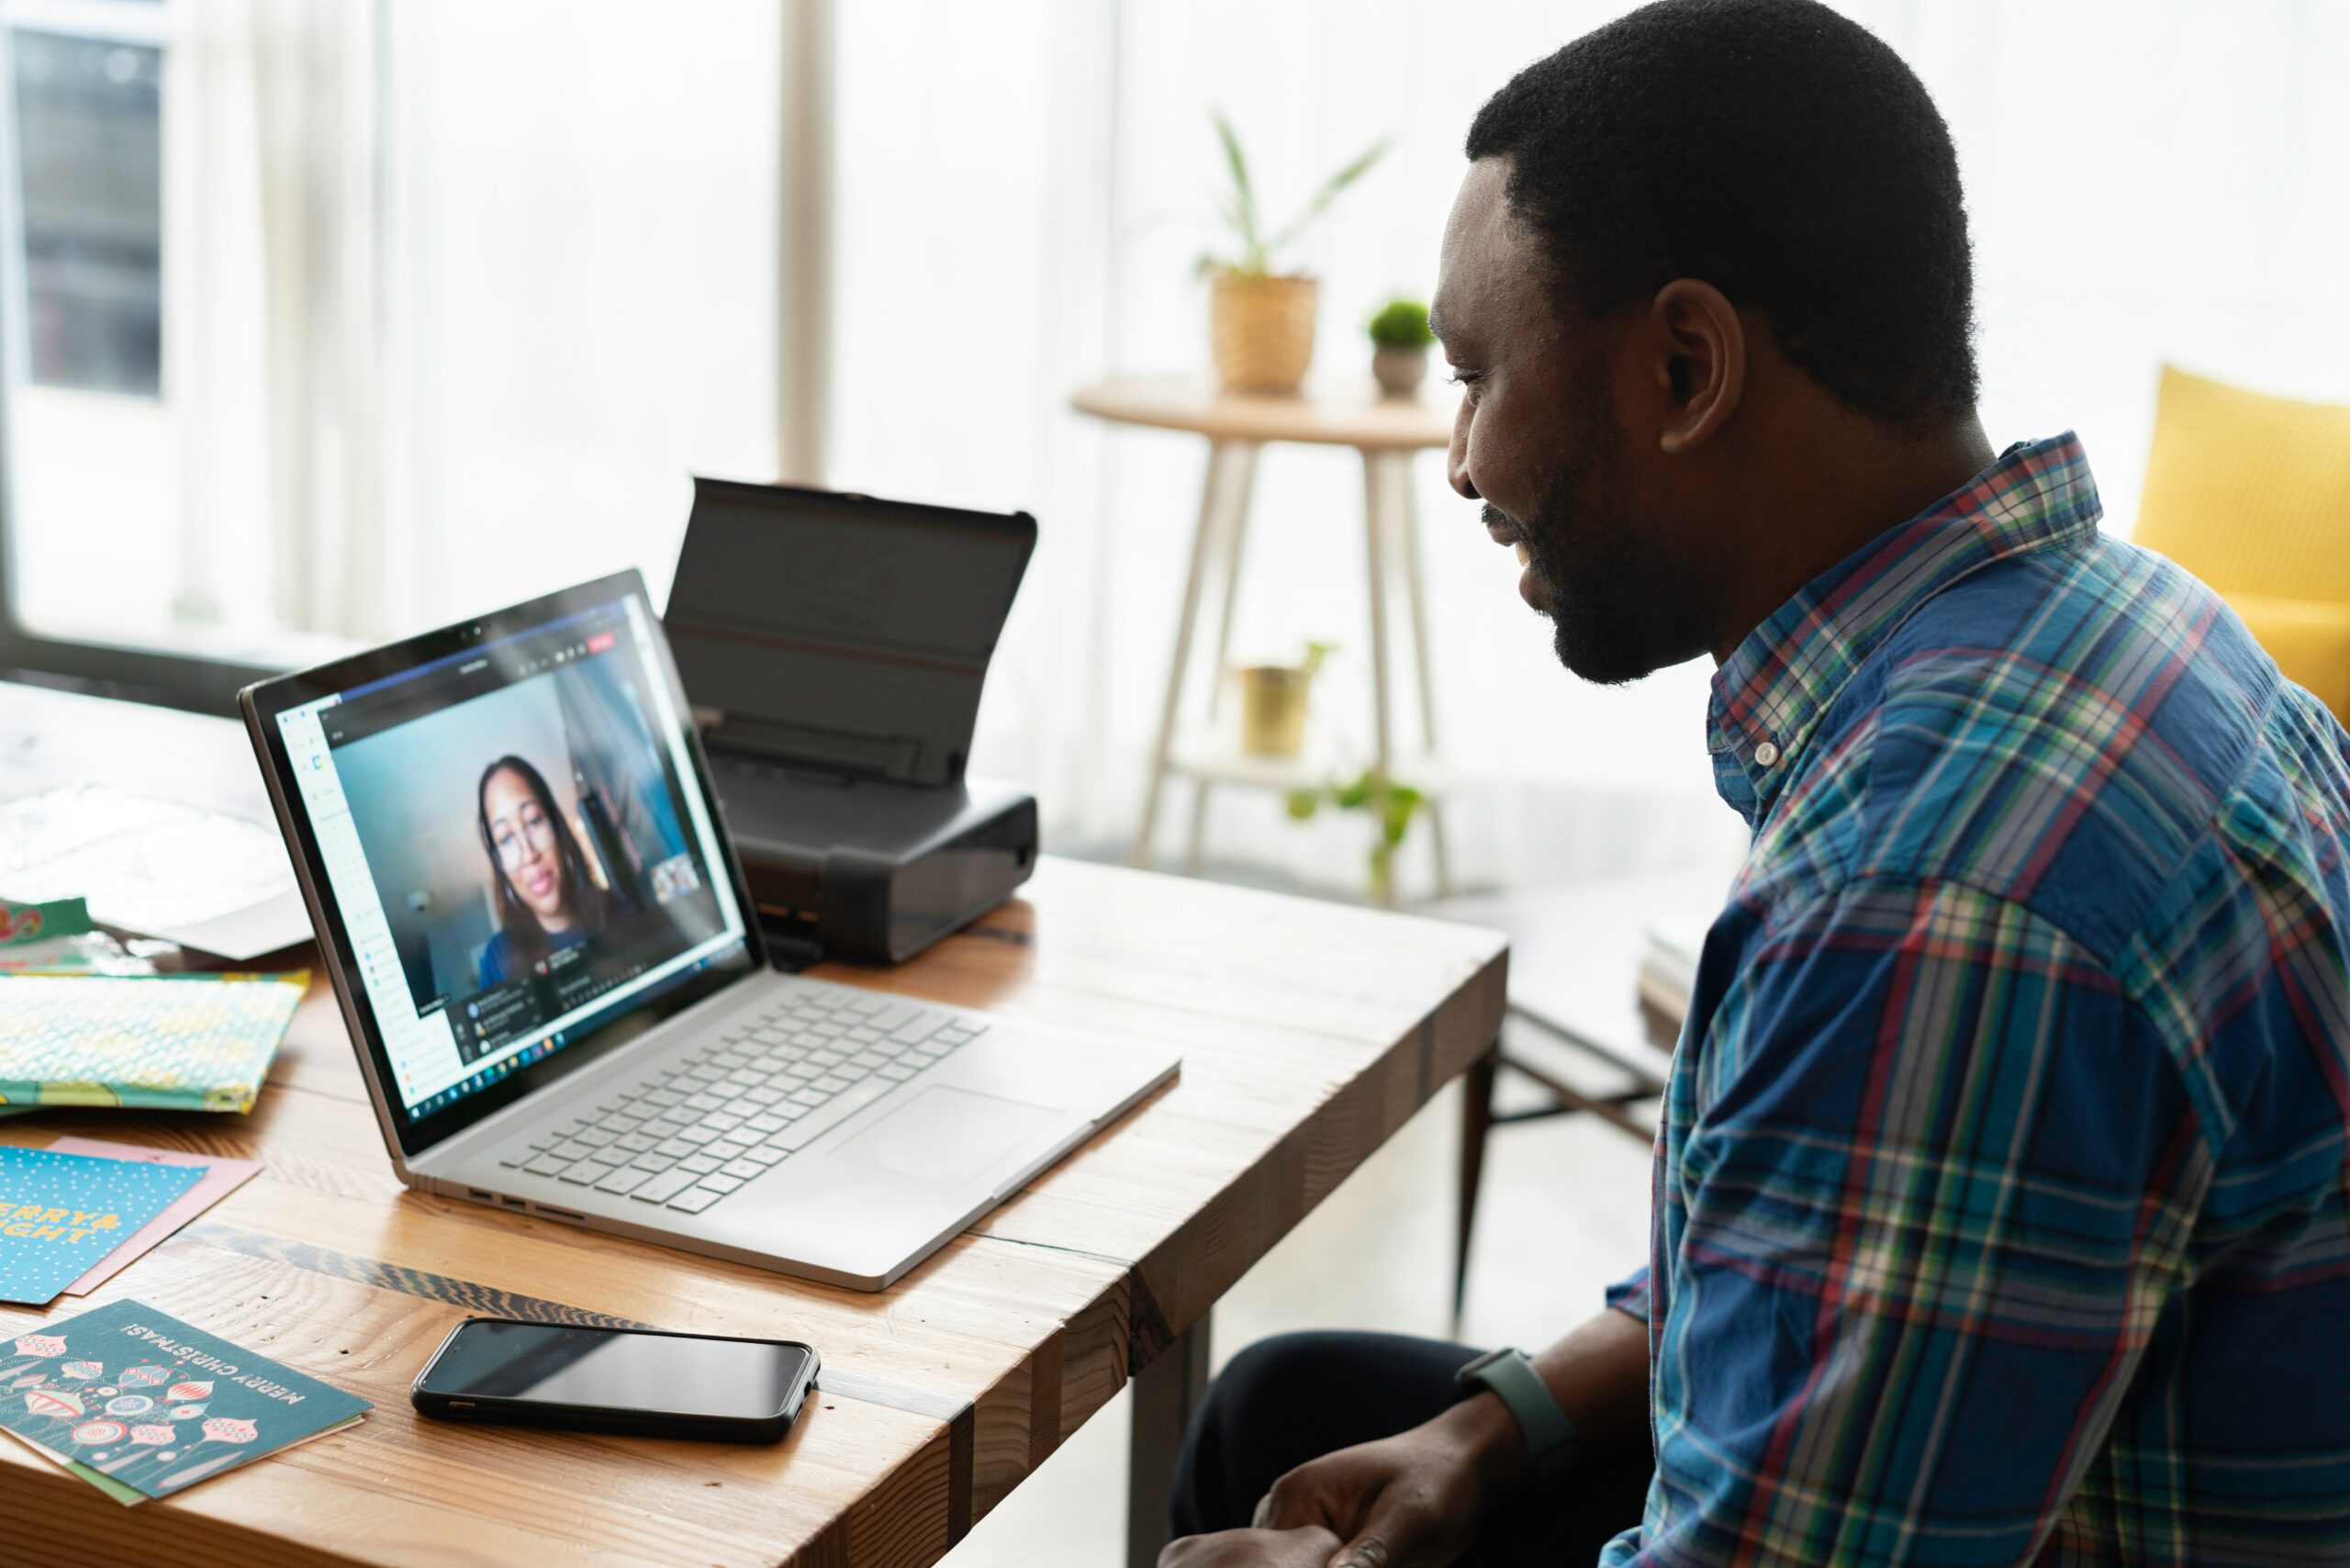 A man attending a video call with a woman on a laptop in an office setting to discuss managed services benefits.